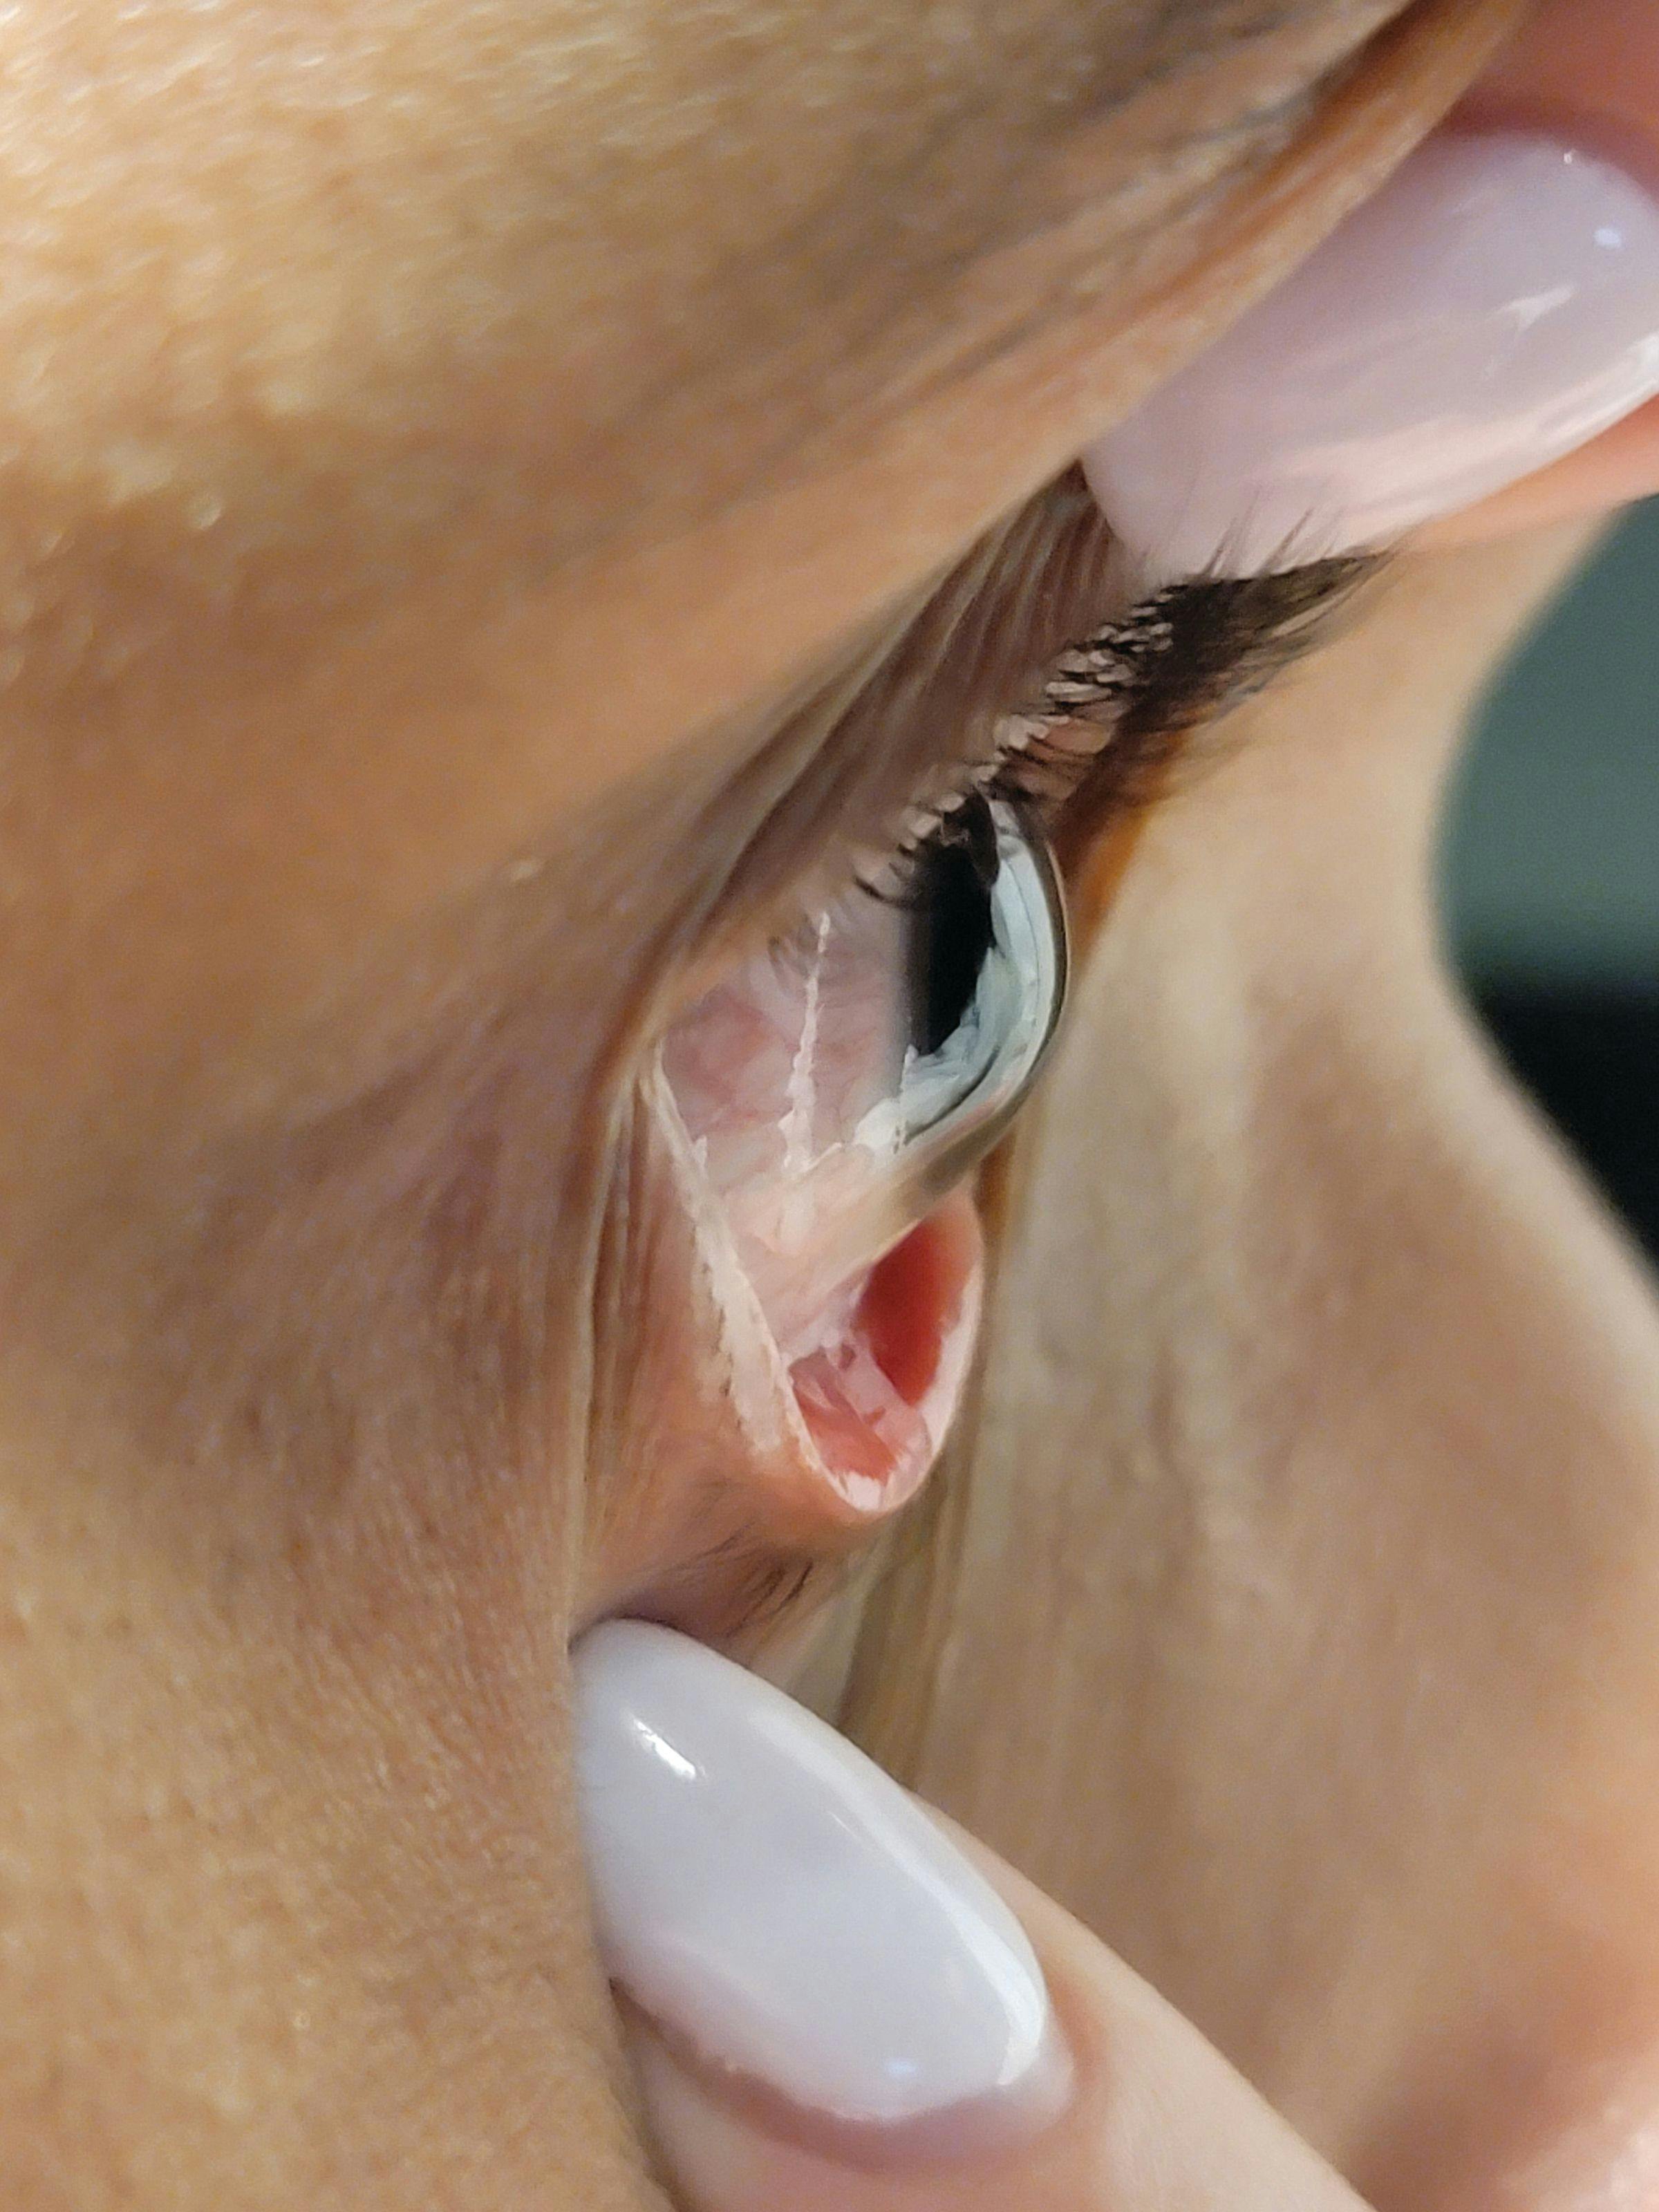 Figure 1. The profile viewing method of scleral lens fitting involves lifting the upper and lower lid and evaluating the overall scleral, allowing for the evaluation of the corneoscleral angle superiorly and inferiorly